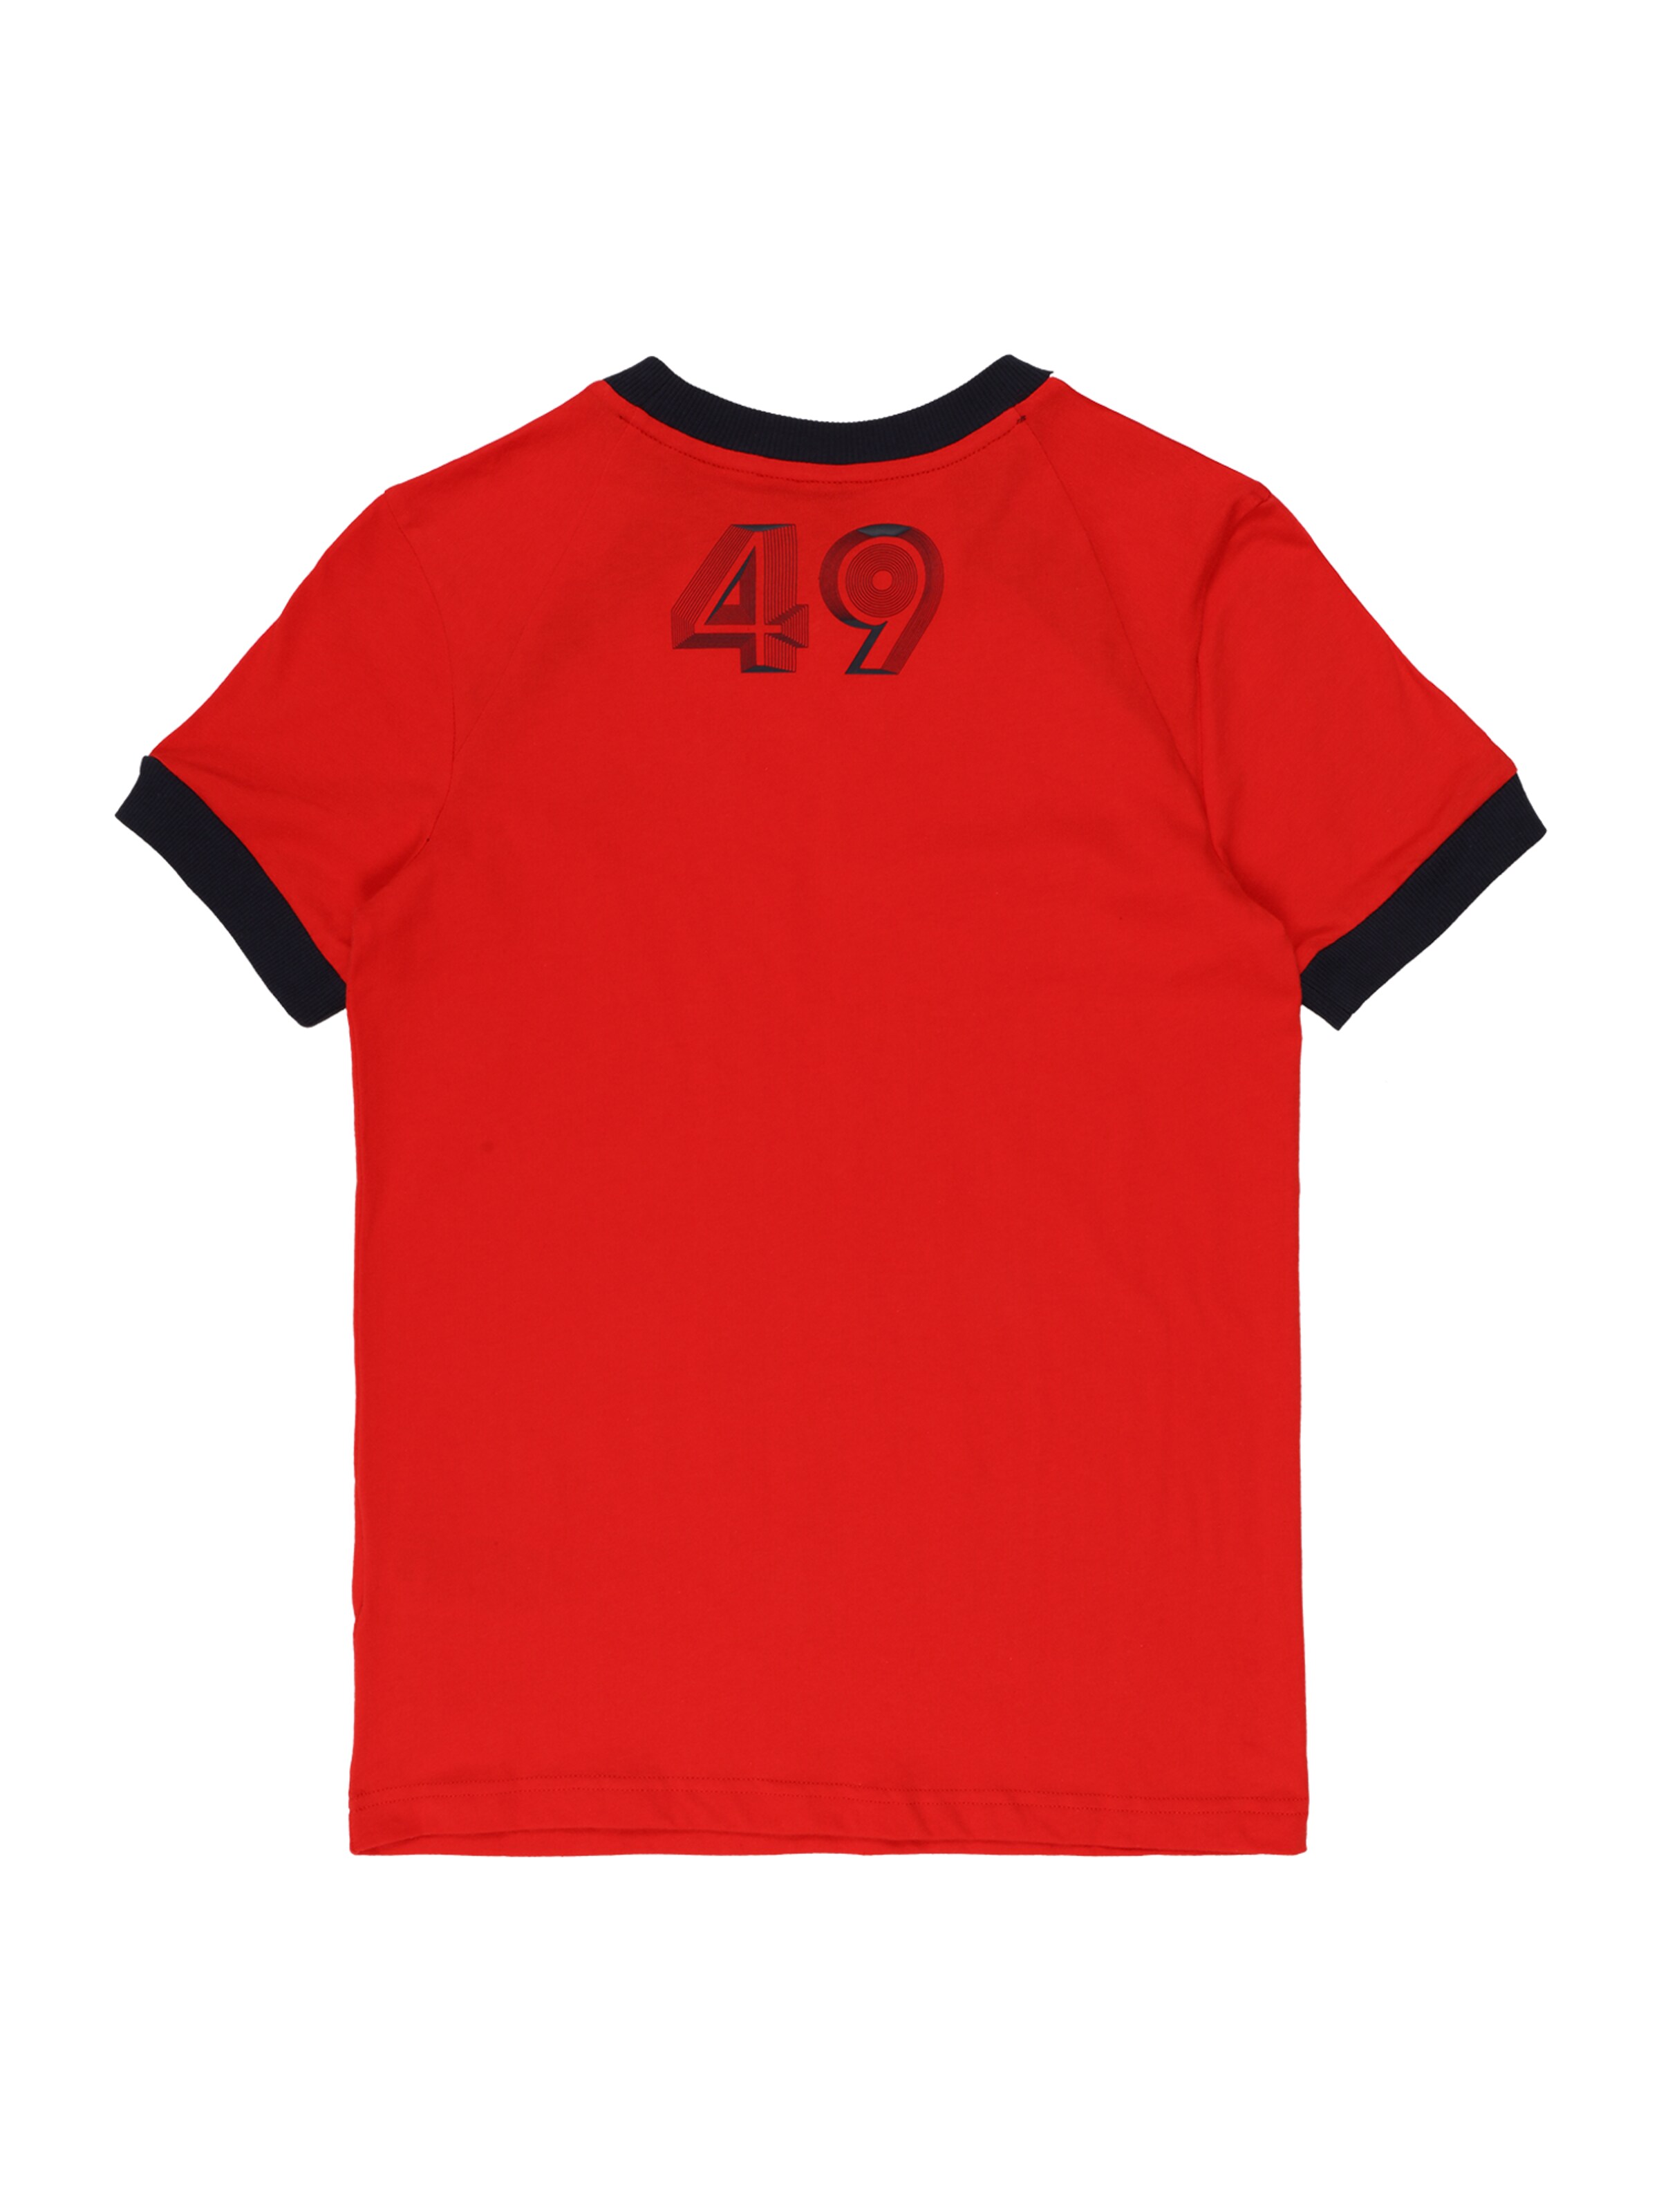 Kinder Teens (Gr. 140-176) ADIDAS PERFORMANCE T-Shirt in Rot - LO89359